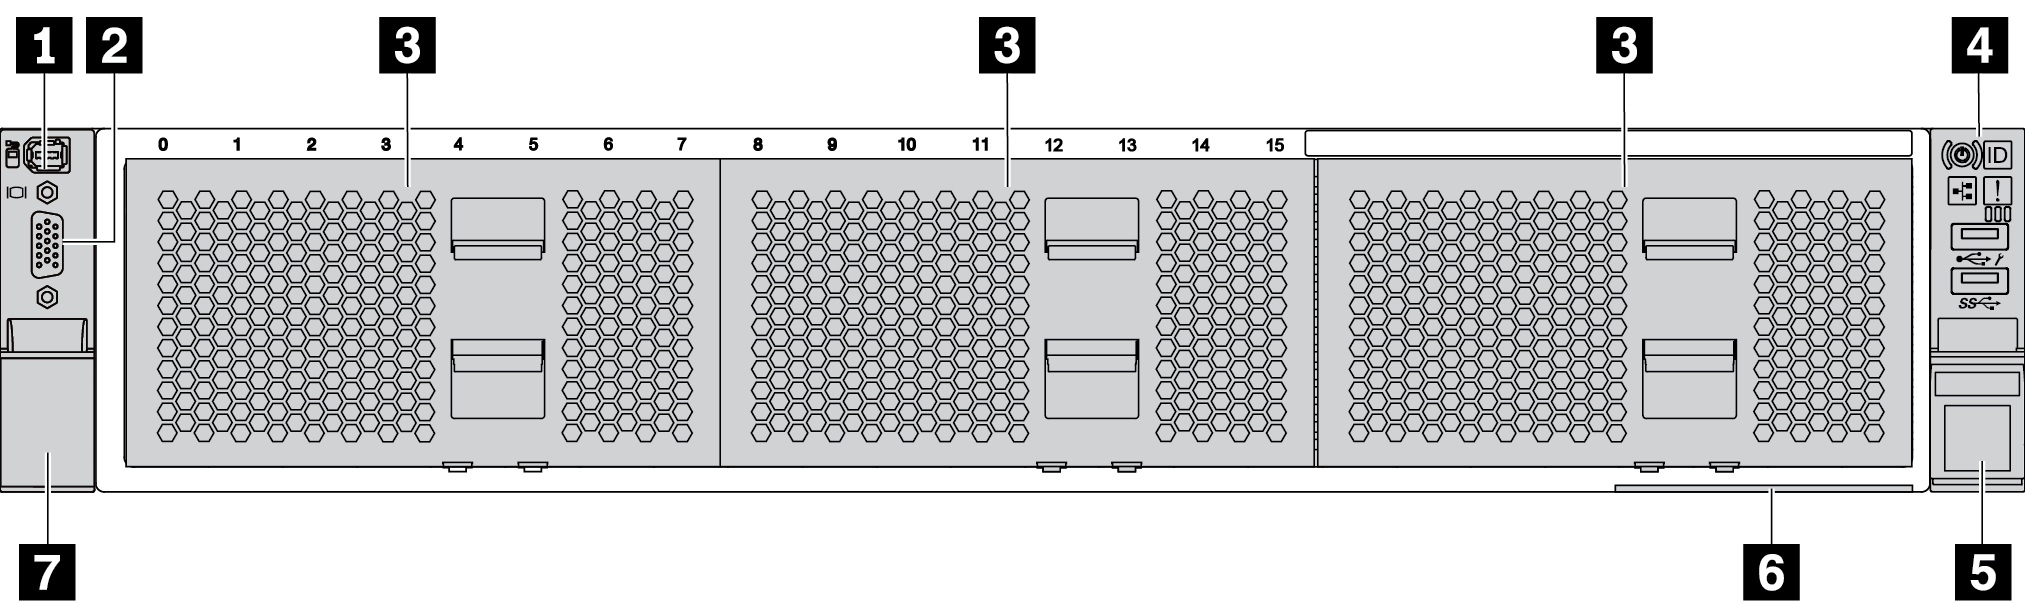 Front view of server models with 2.5-inch front drive bays (without backplanes)